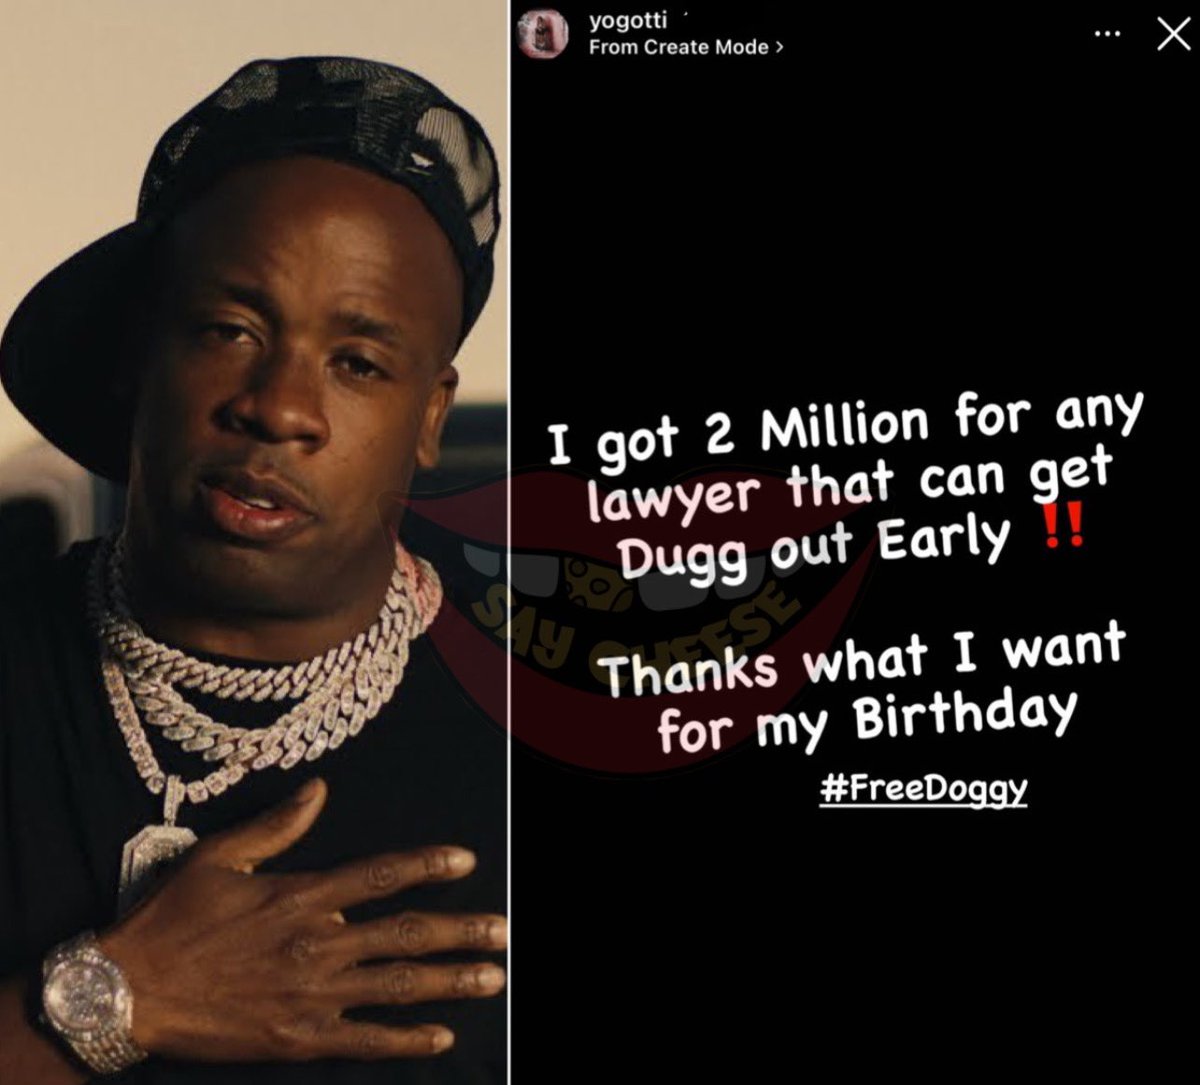 Yo Gotti offers to pay a lawyer $2 million to get 42 Dugg out of jail early